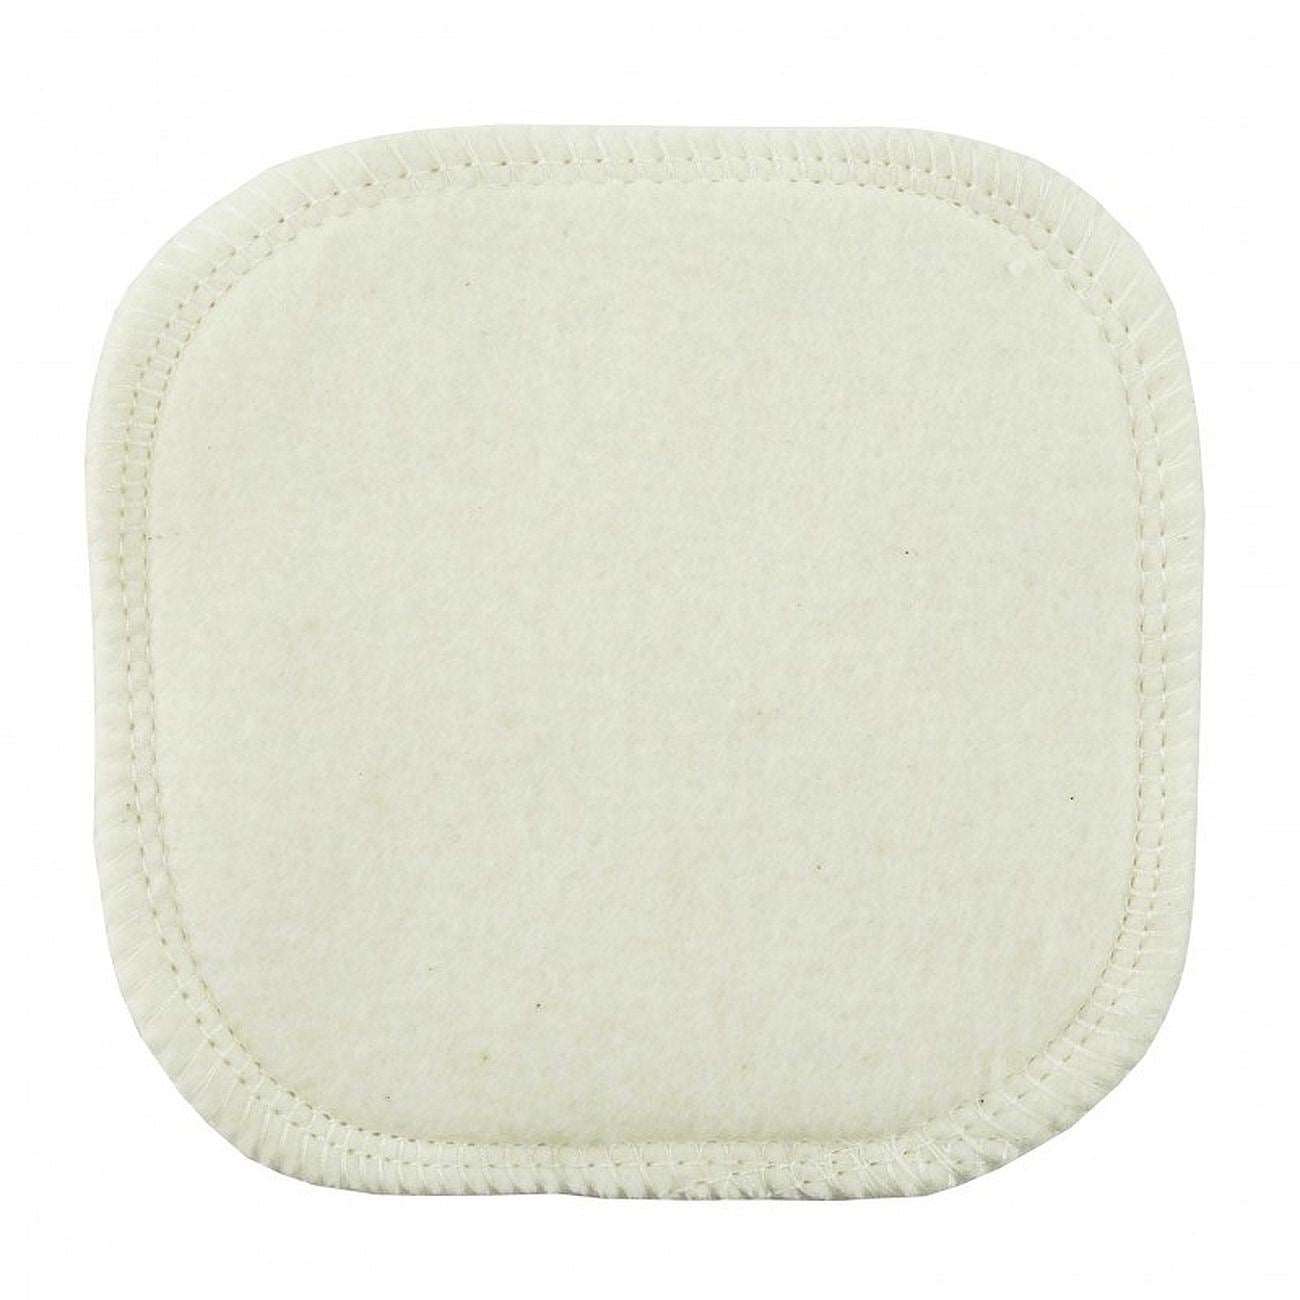 Accessories Washable Cleansing Pad in Cotton 10 cm x 10 cm